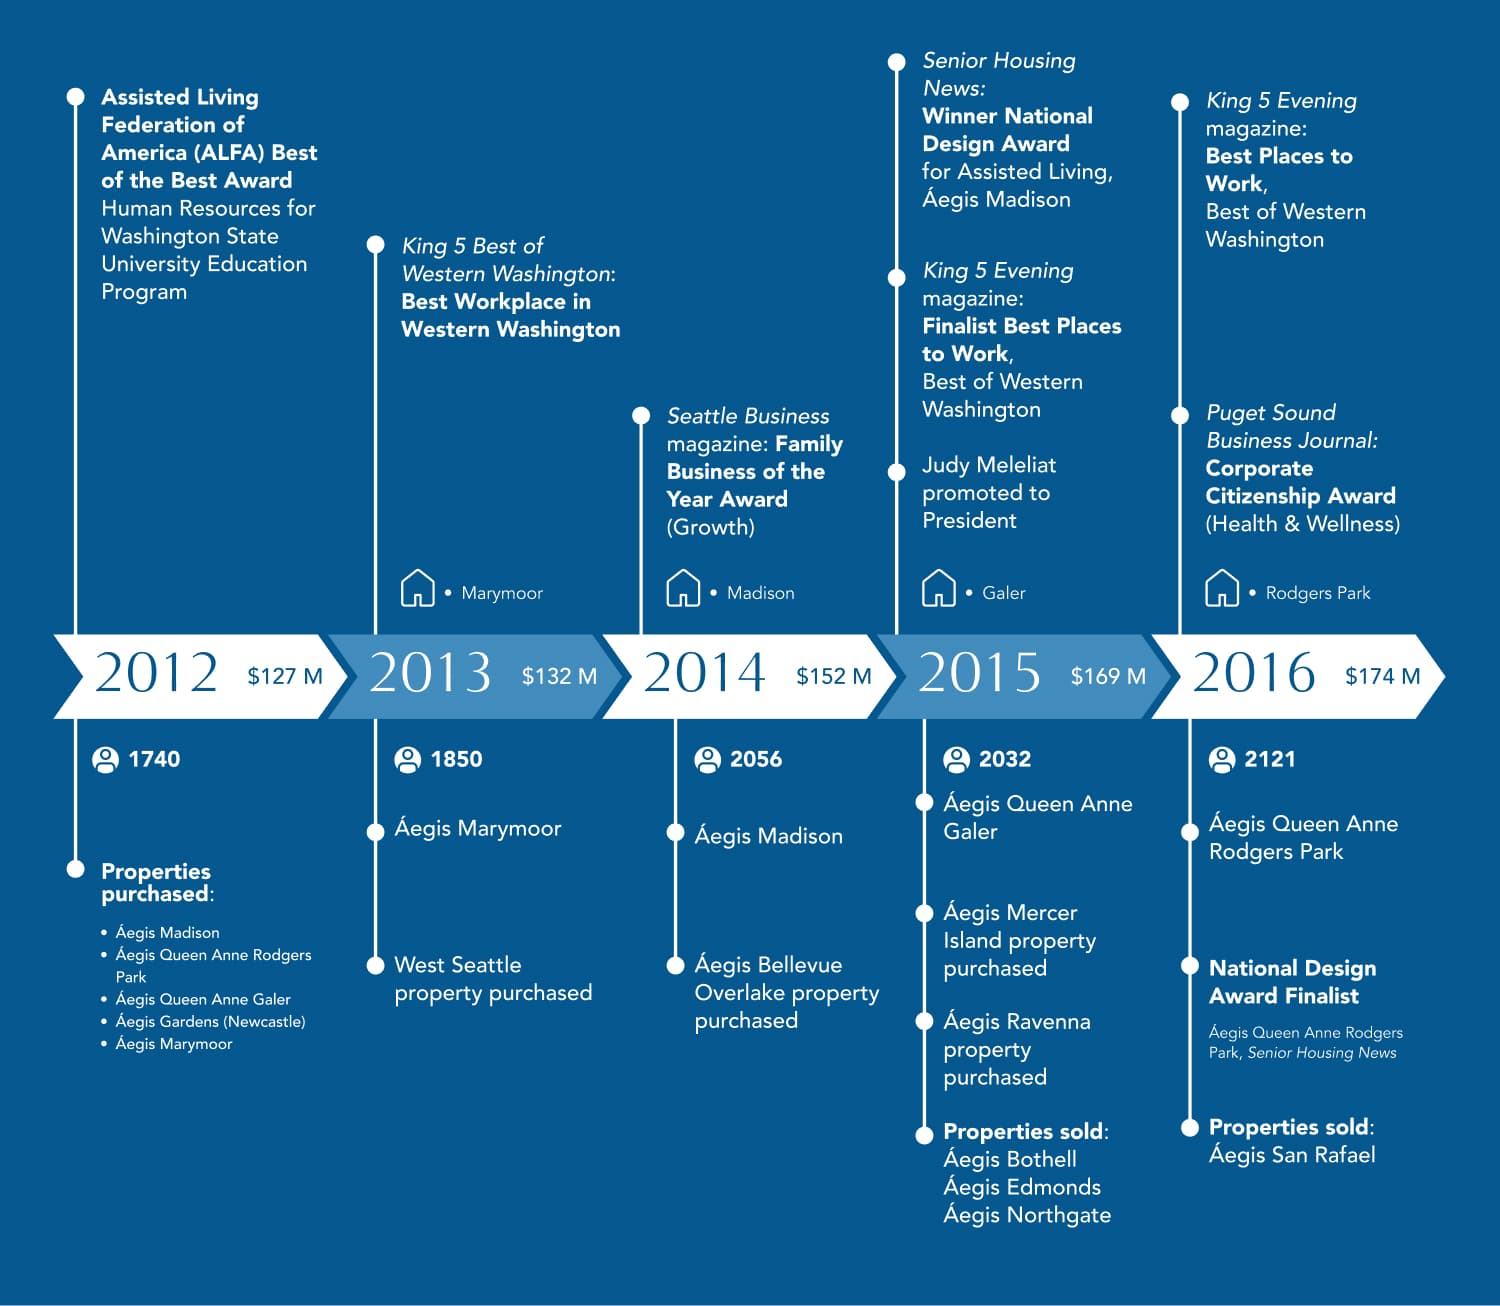 A timeline of Aegis Living’s history from 2012–2016